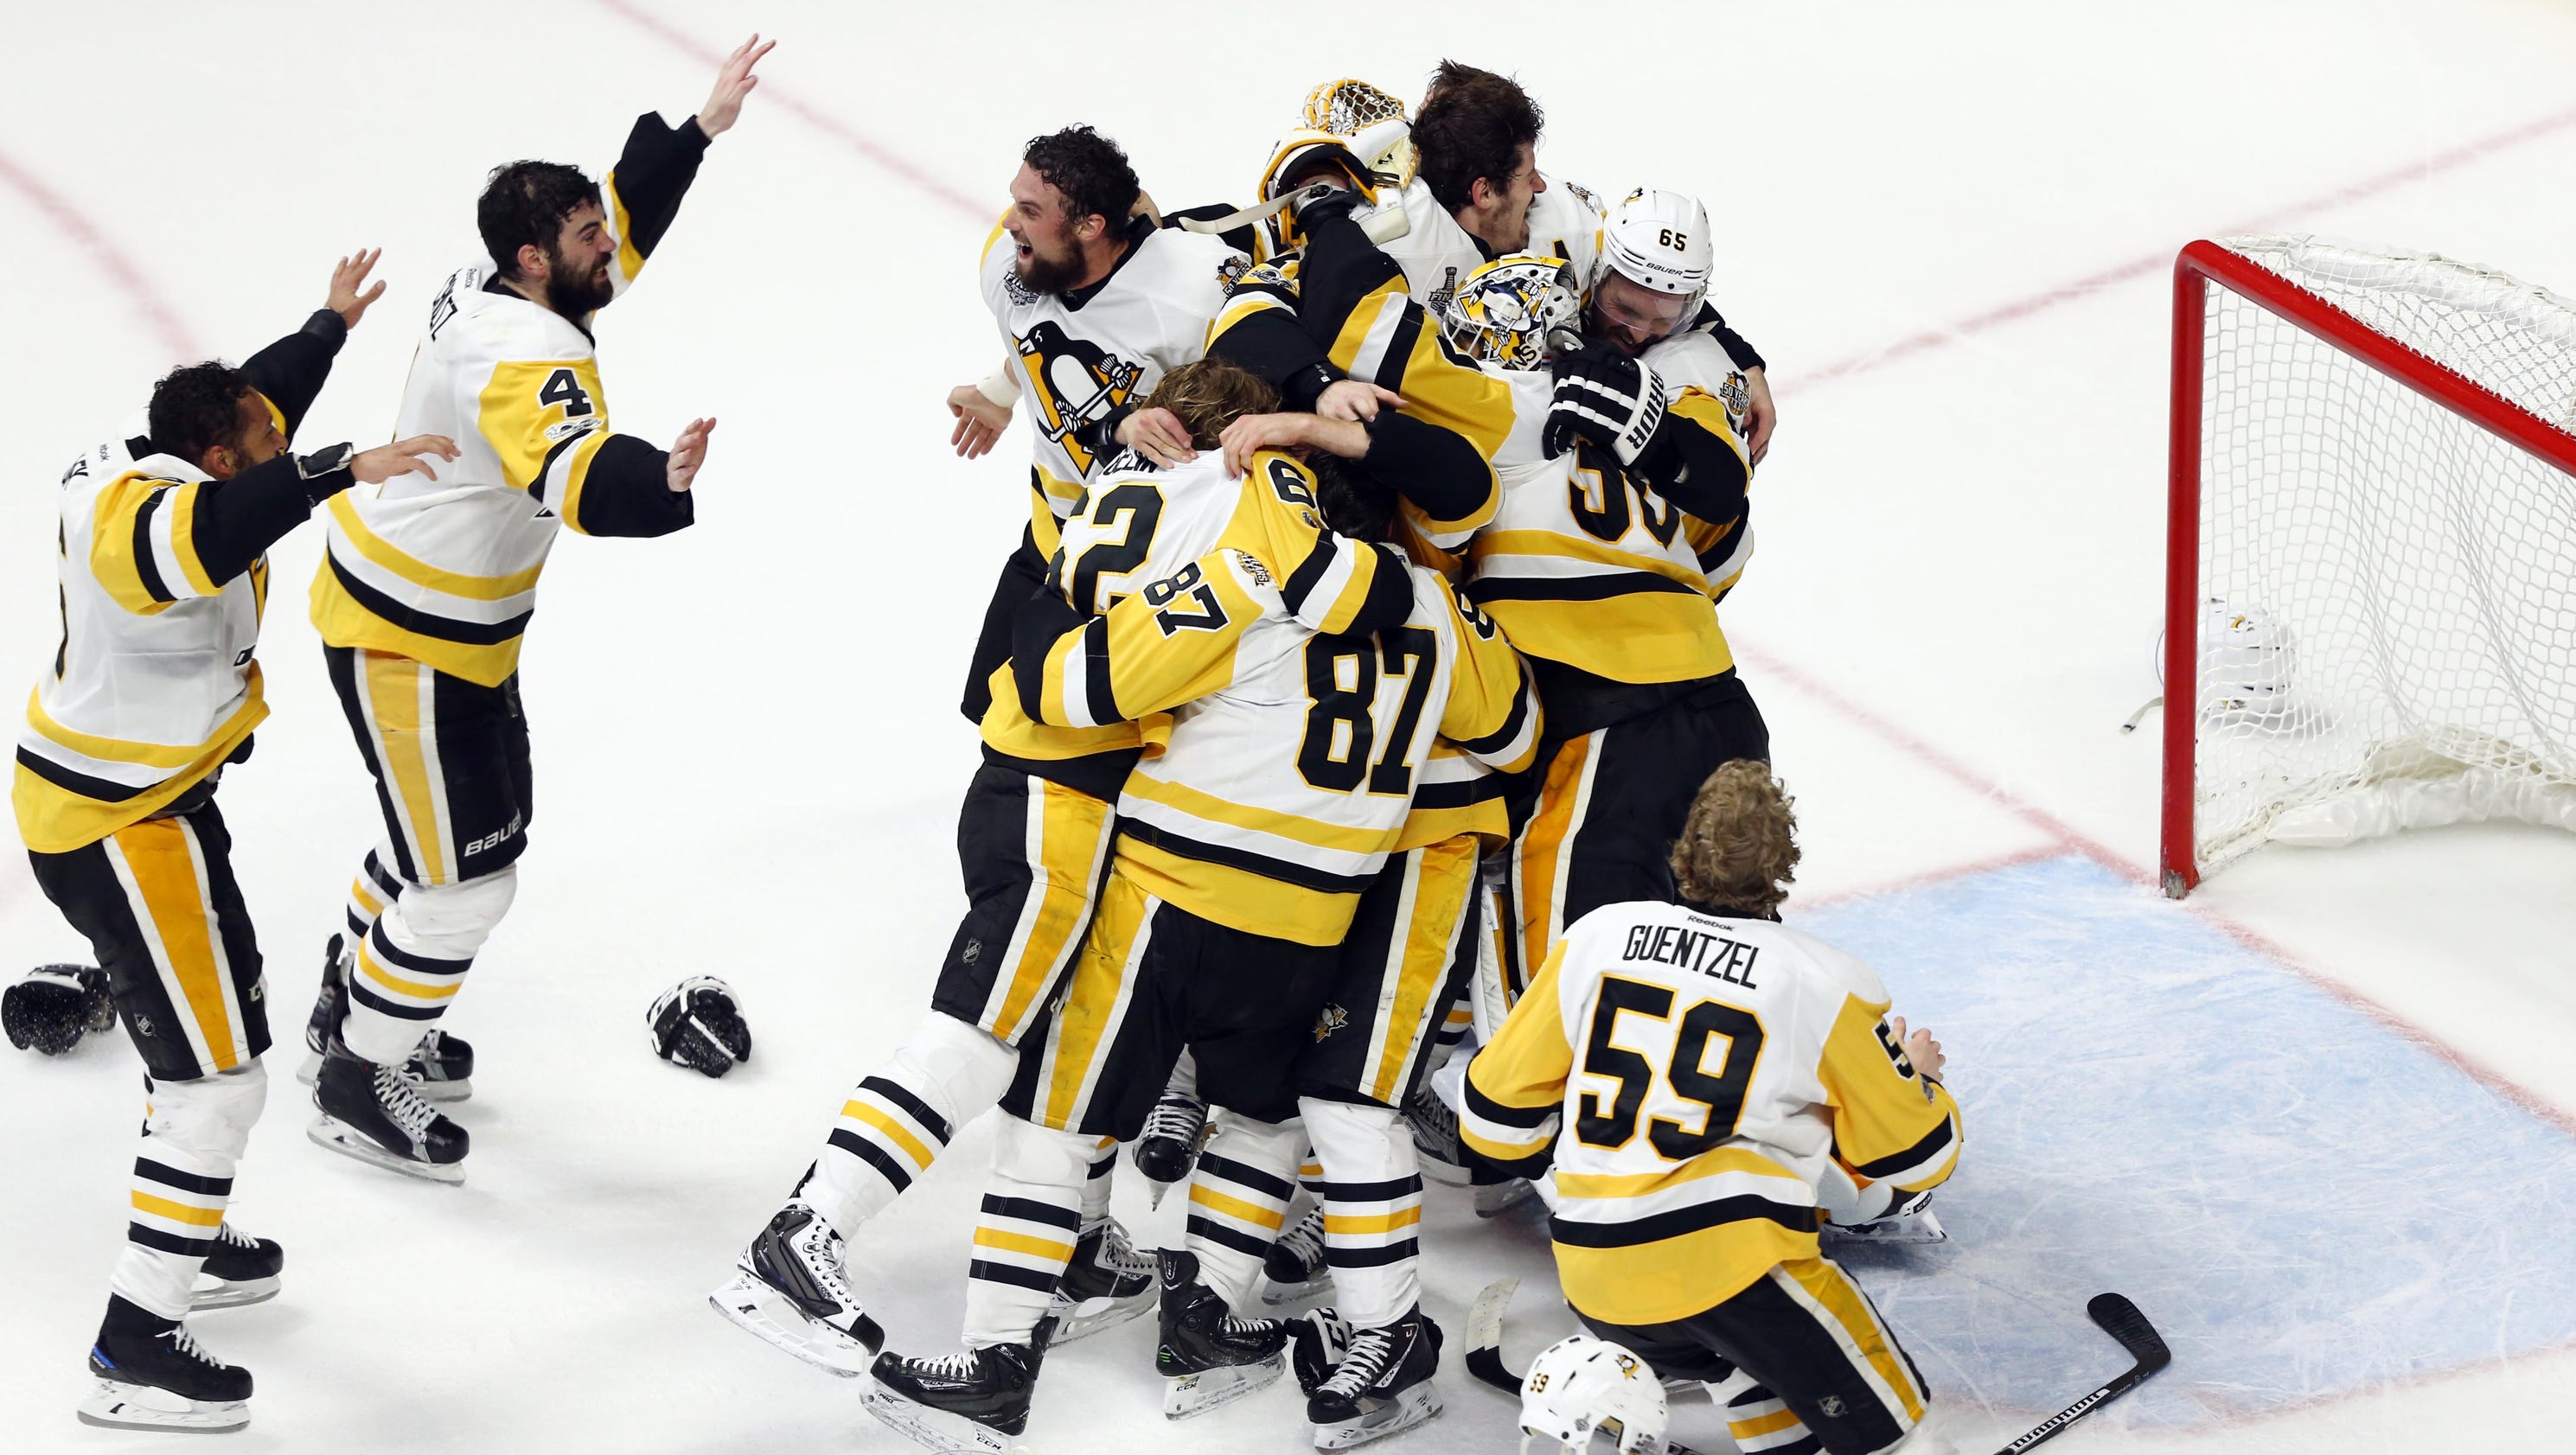 Penguins have become NHL's newest dynasty3200 x 1680